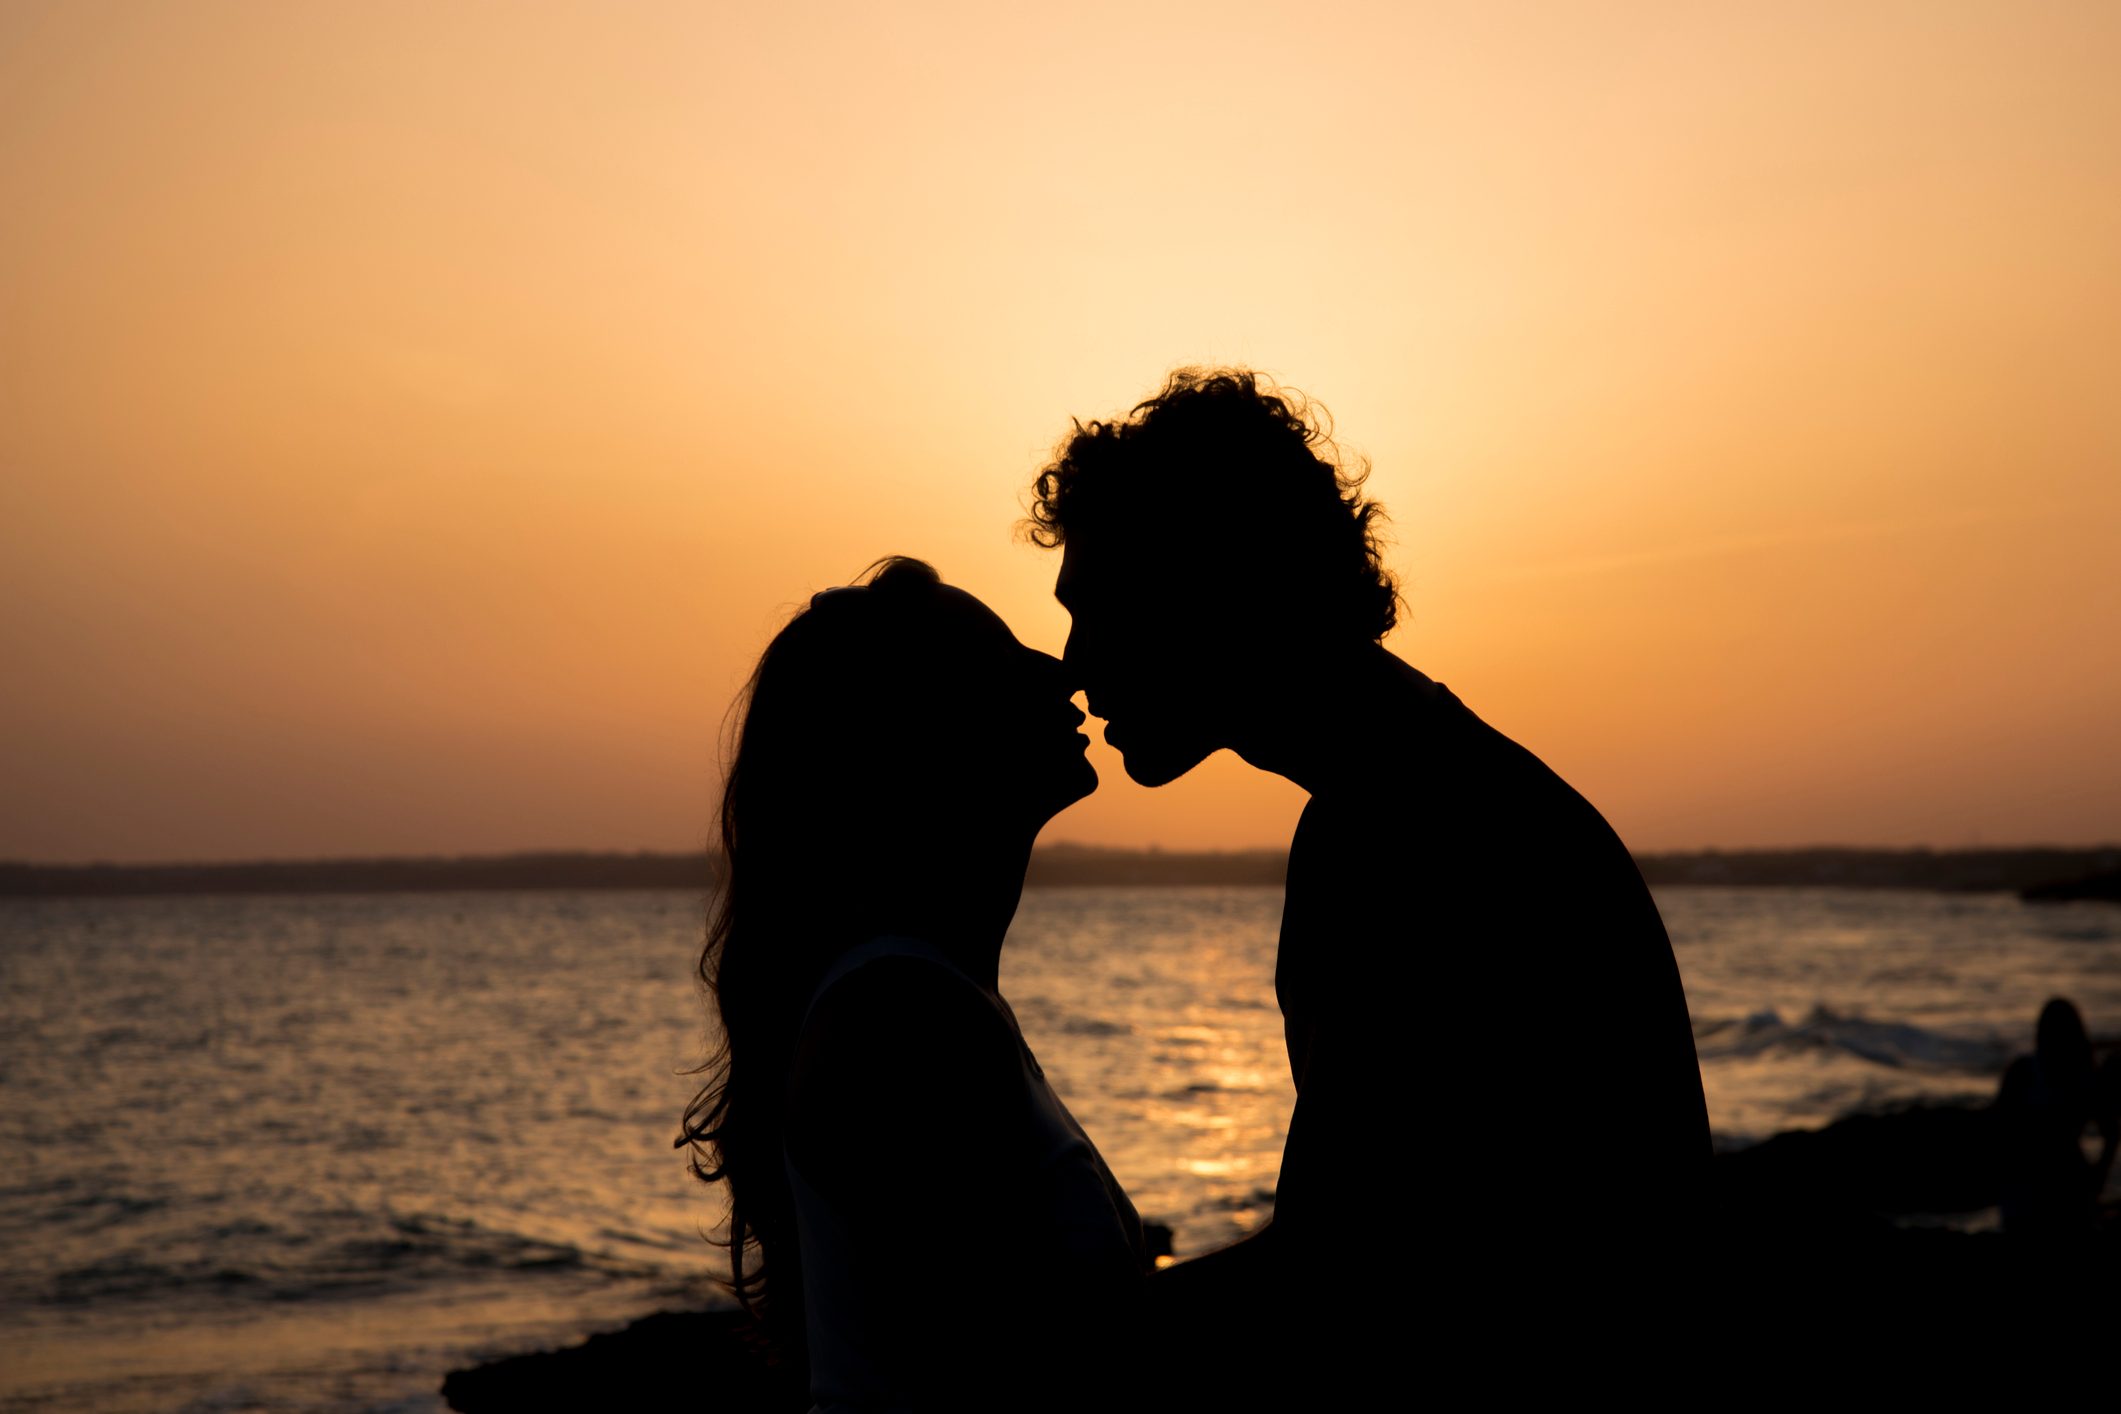 man and woman kissing silhouette during sunset